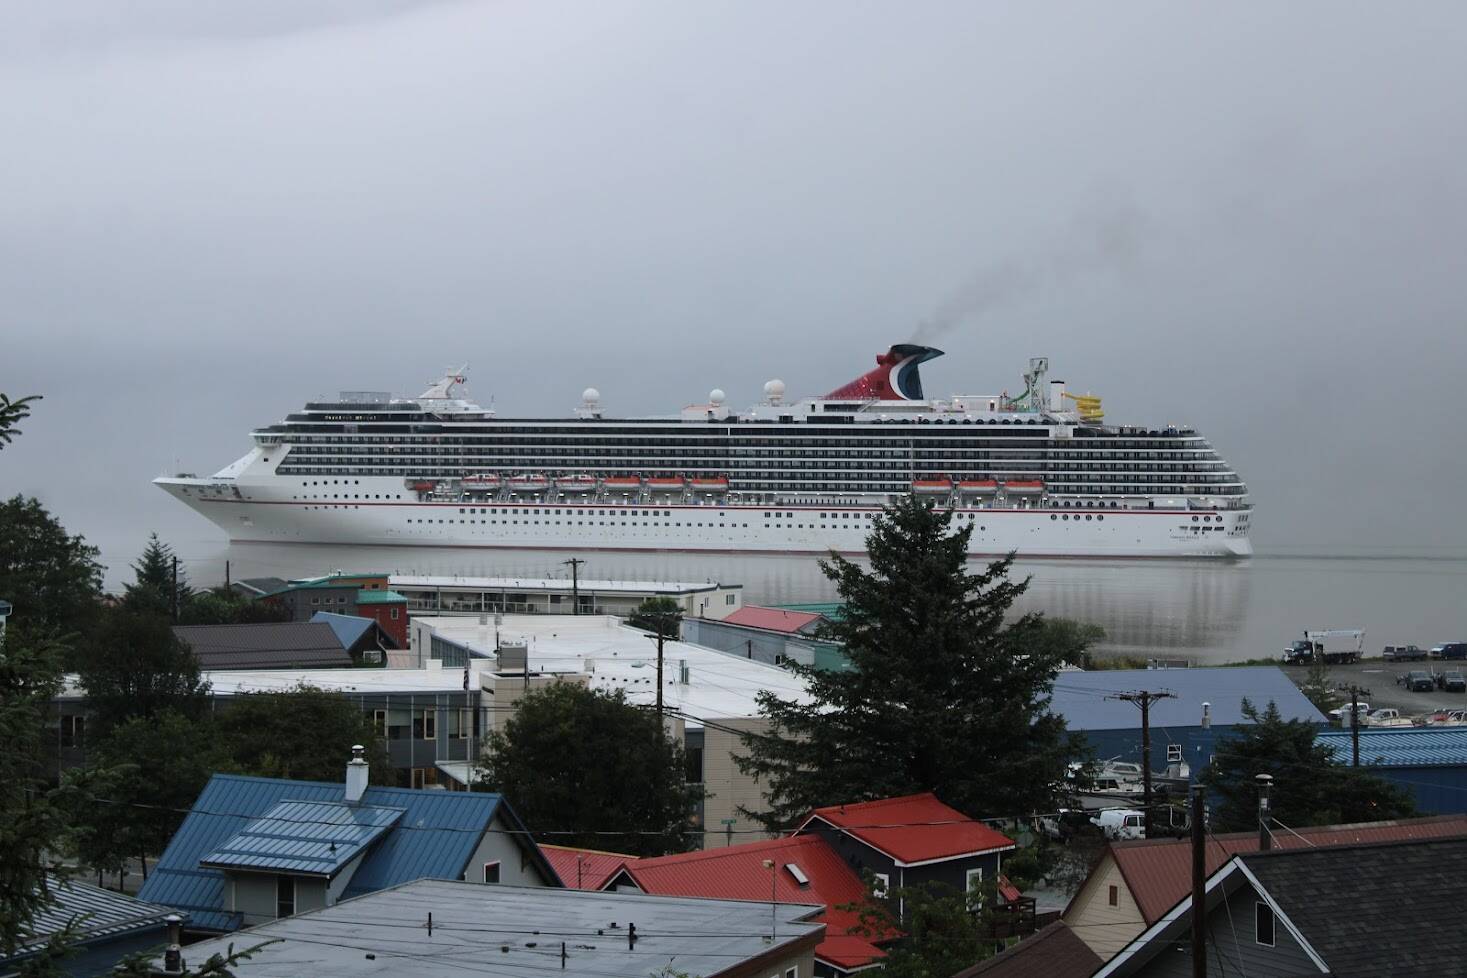 A Carnival cruise ship arrives in Juneau early in the morning on Aug. 14. Local business owners say that the short and significantly scaled back 2021 cruise season was welcome after the cancelation of the 2020 season. However, they say it was not enough and they are struggling to survive. (Dana Zigmund/Juneau Empire)